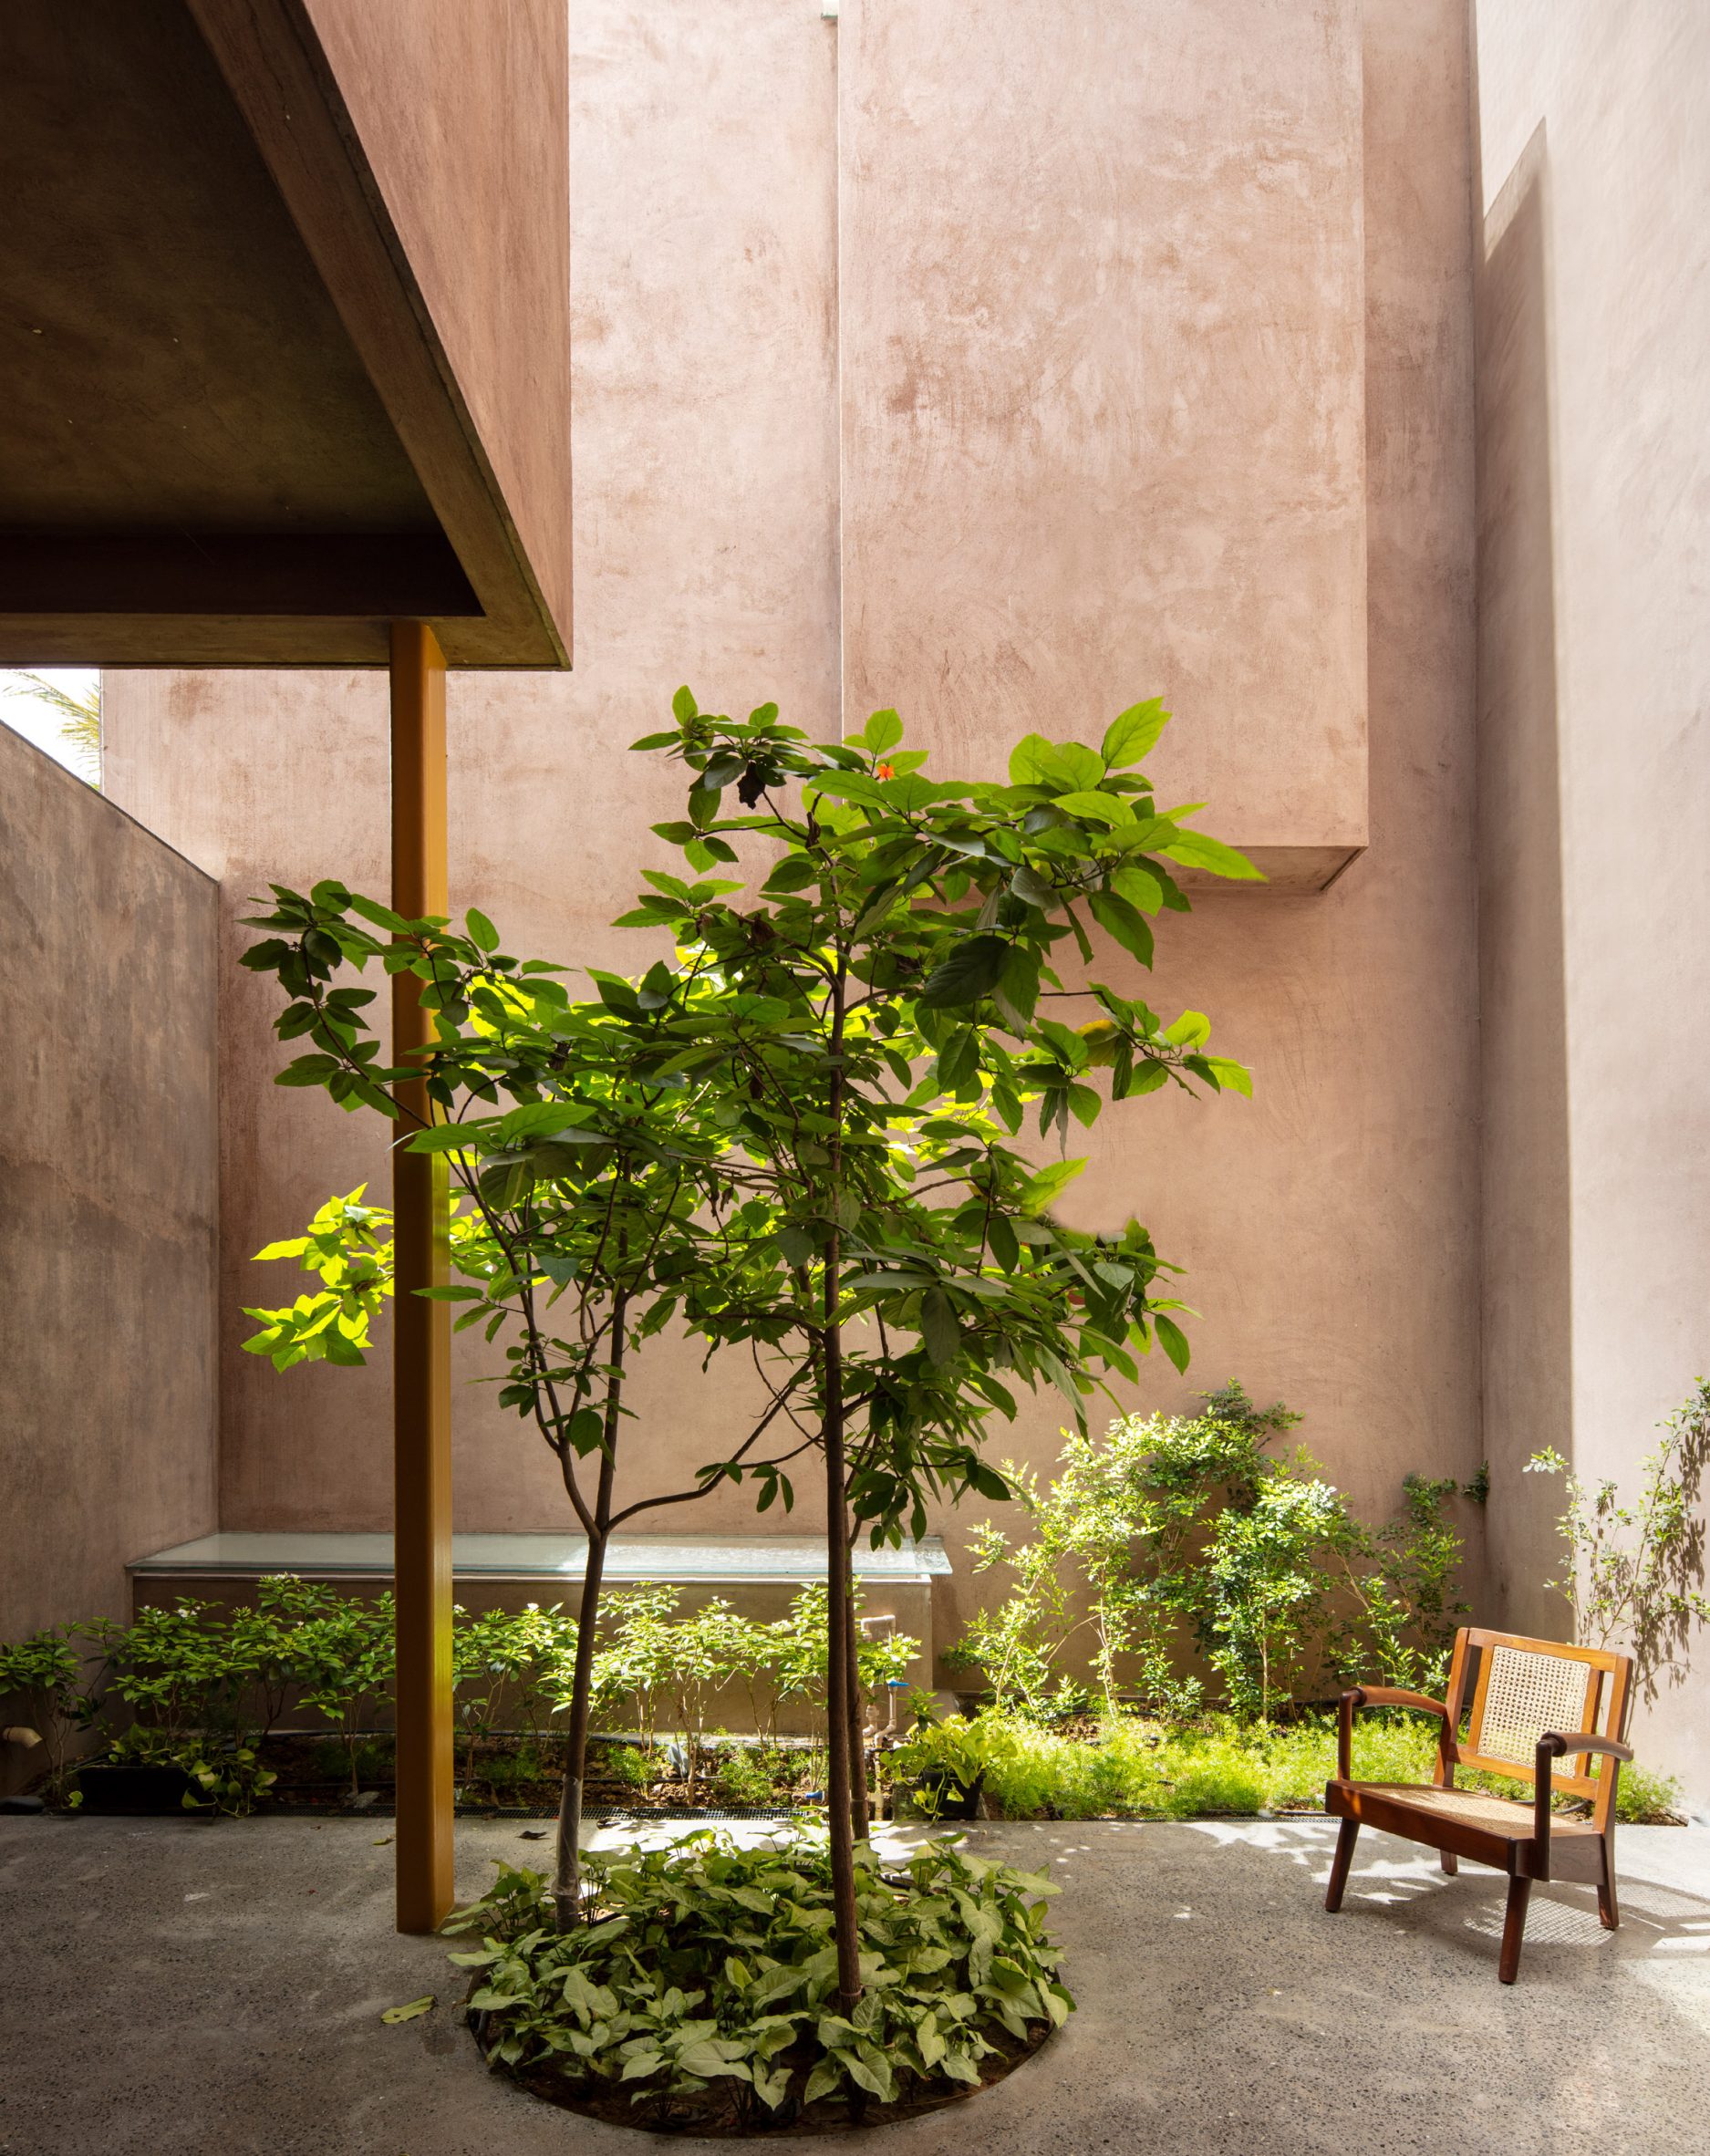 Image of a courtyard at Cool House